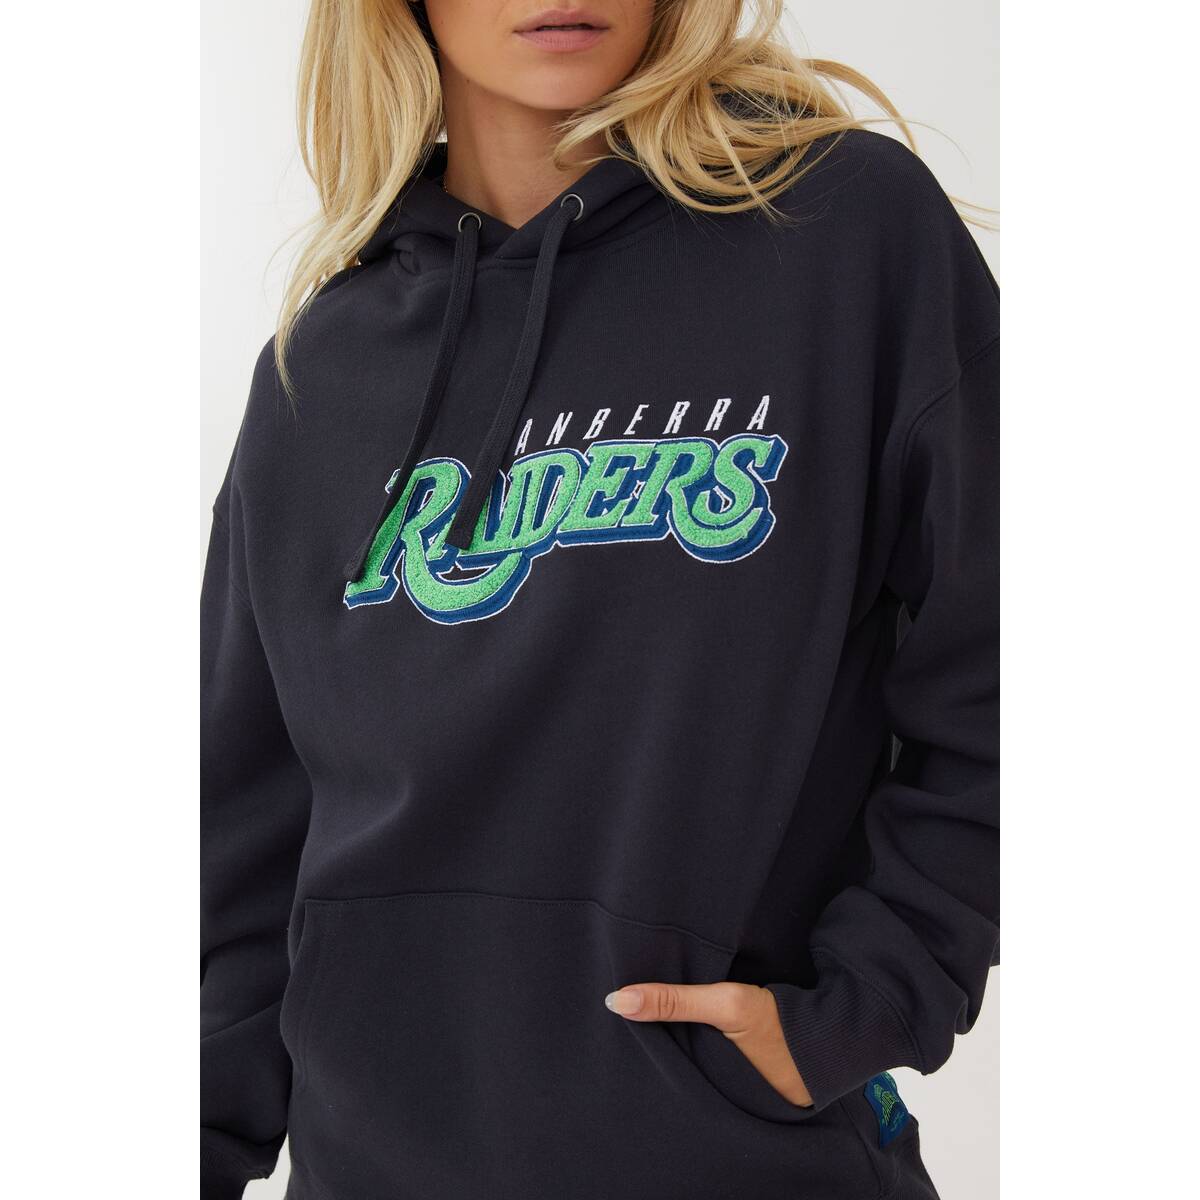 NRL Womens Oversized Boucle Embroidered Club Hoodie1